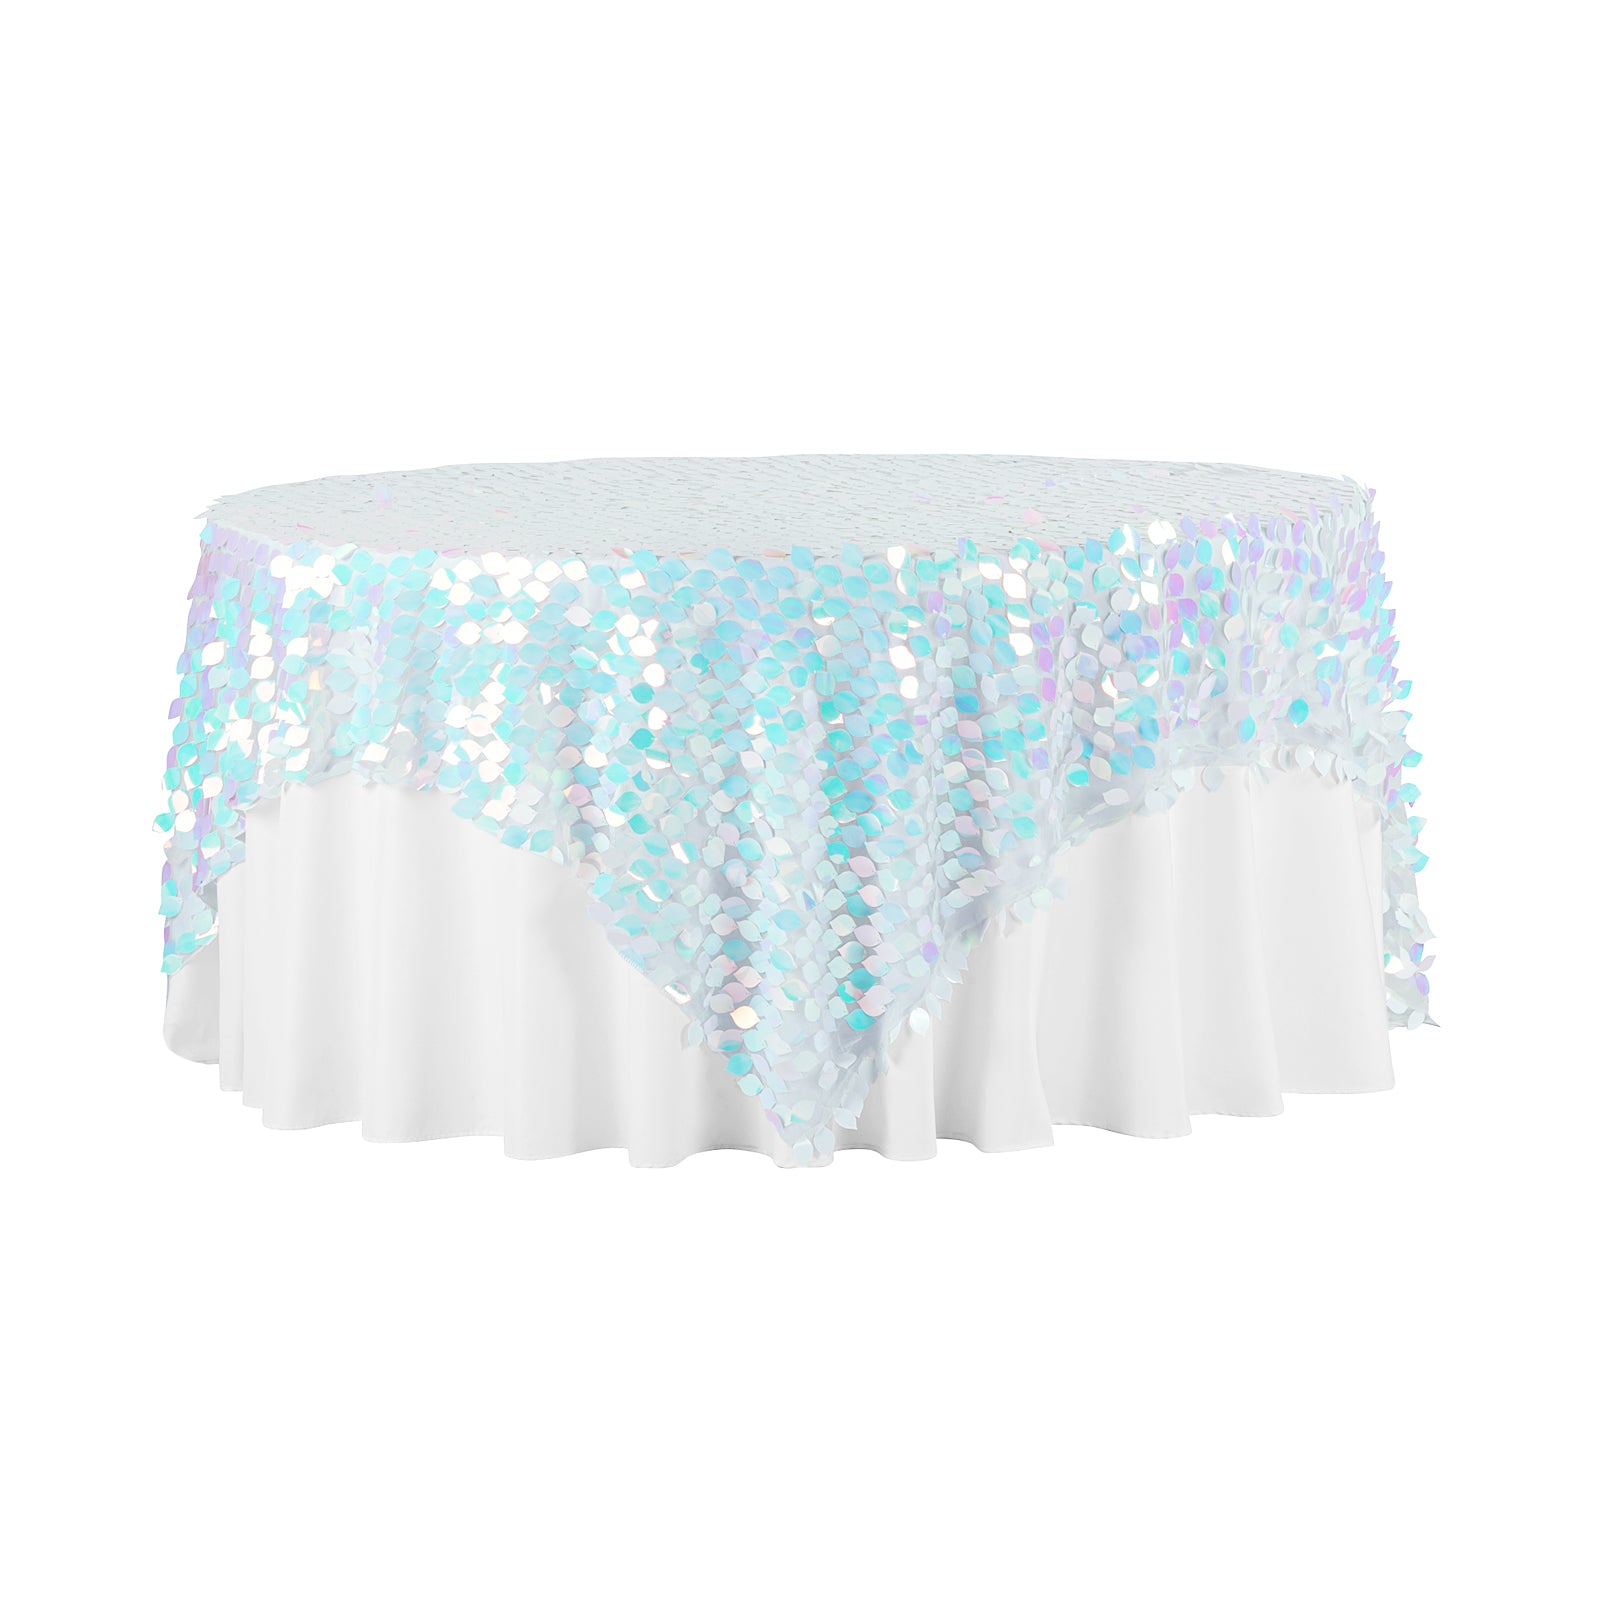 Leaf Payette Sequin Table Overlay Topper 90"x90" Square - Iridescent White - CV Linens